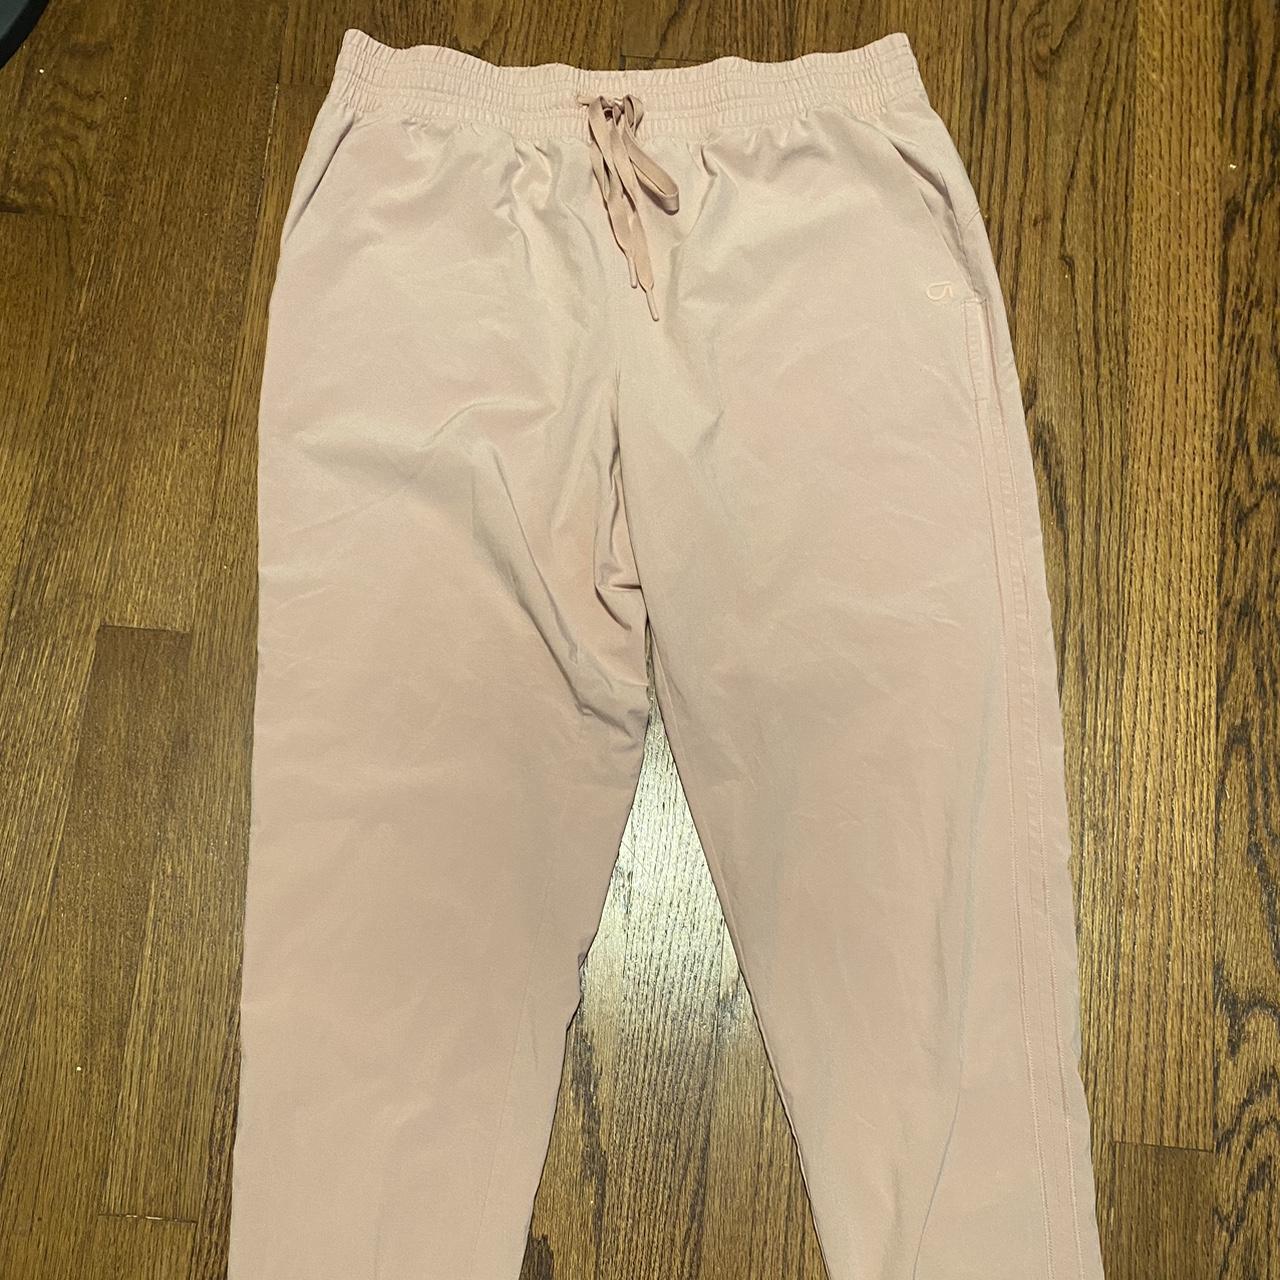 GapFit pink athletic joggers. Lightweight and - Depop